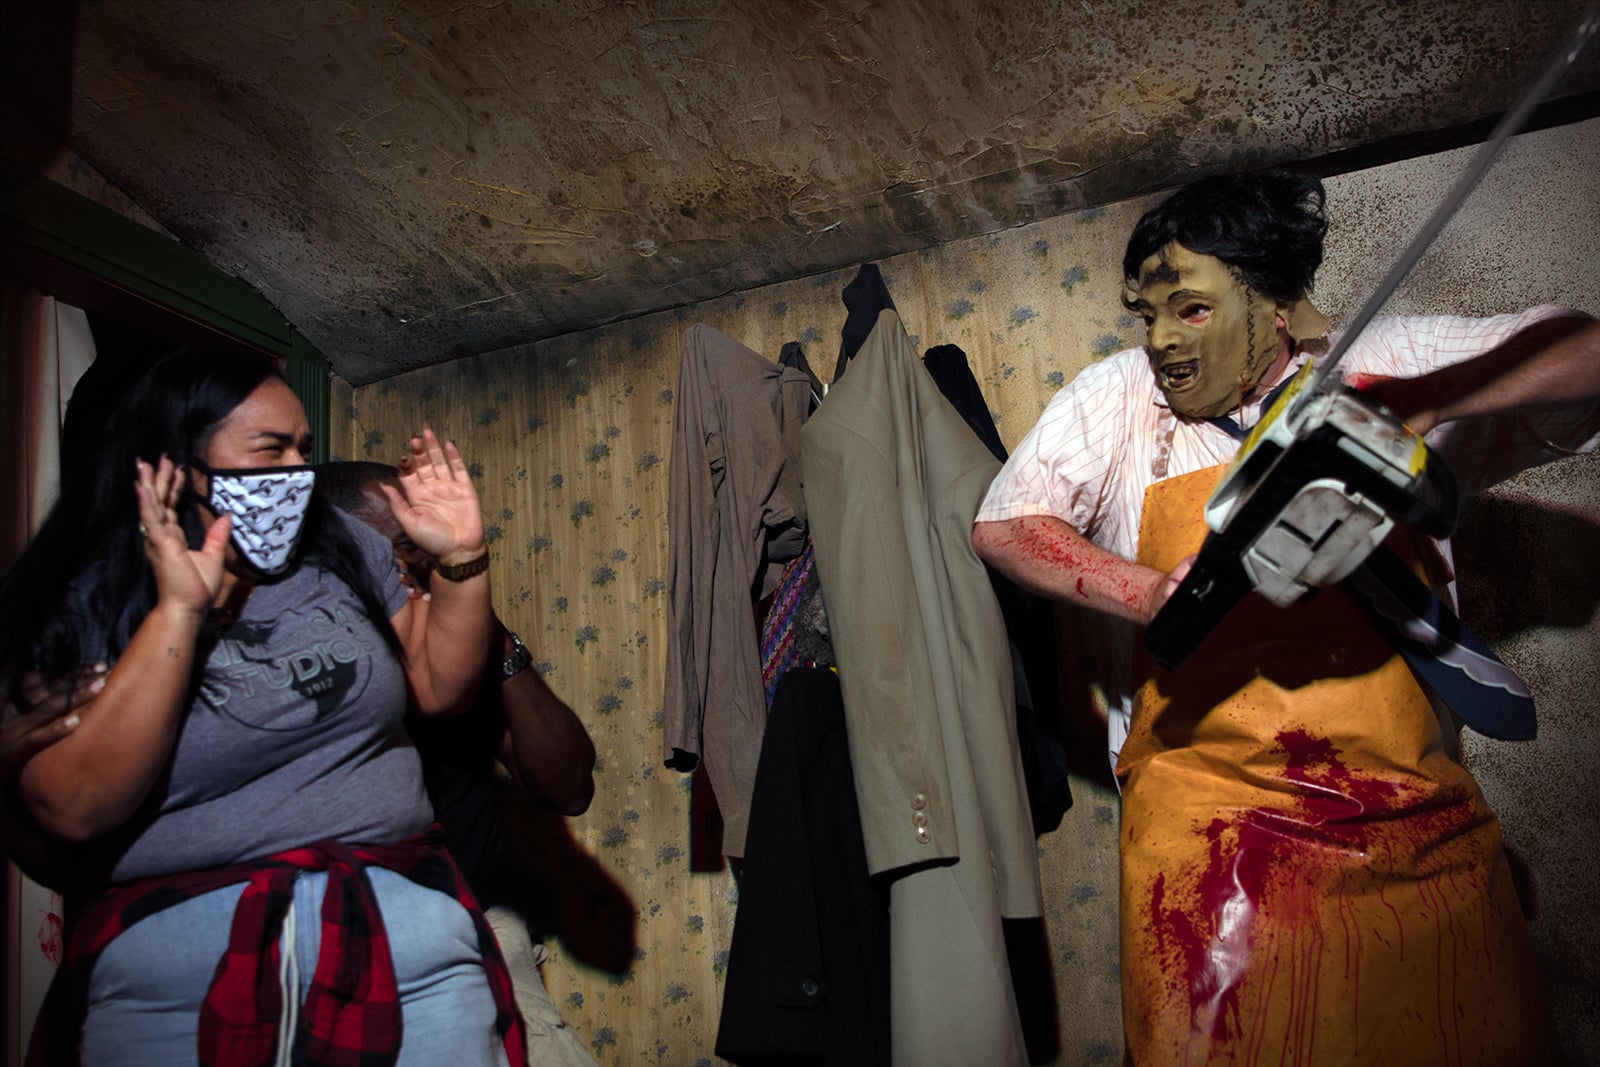 Guests in Texas Chainsaw Massacre haunted house